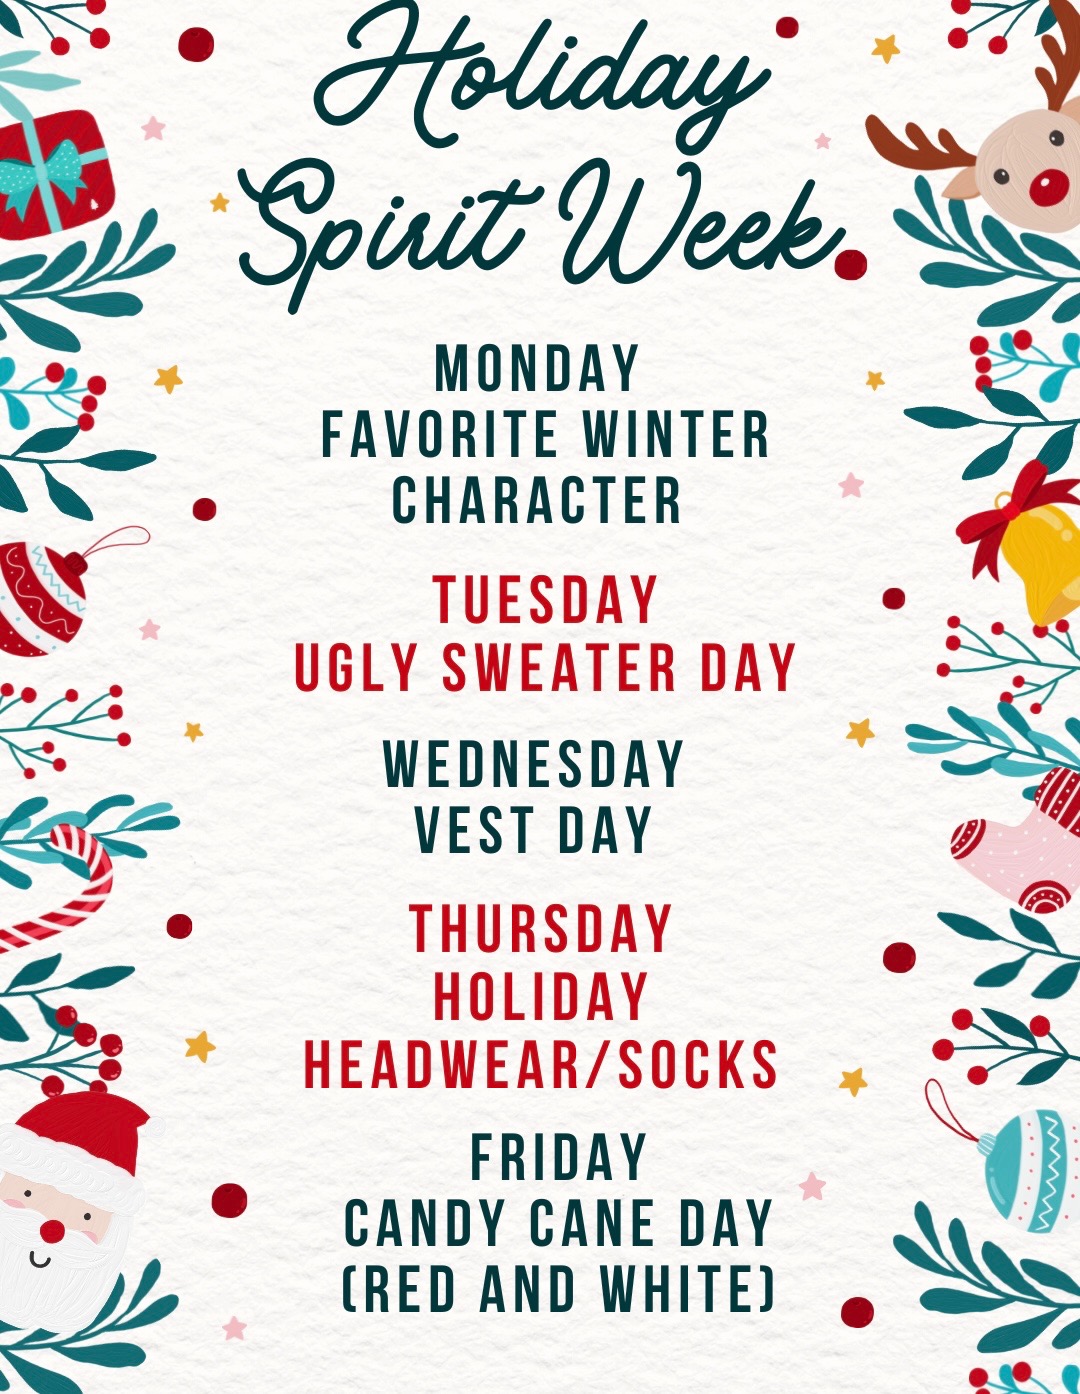 Holiday Spirit Week Themes Announced